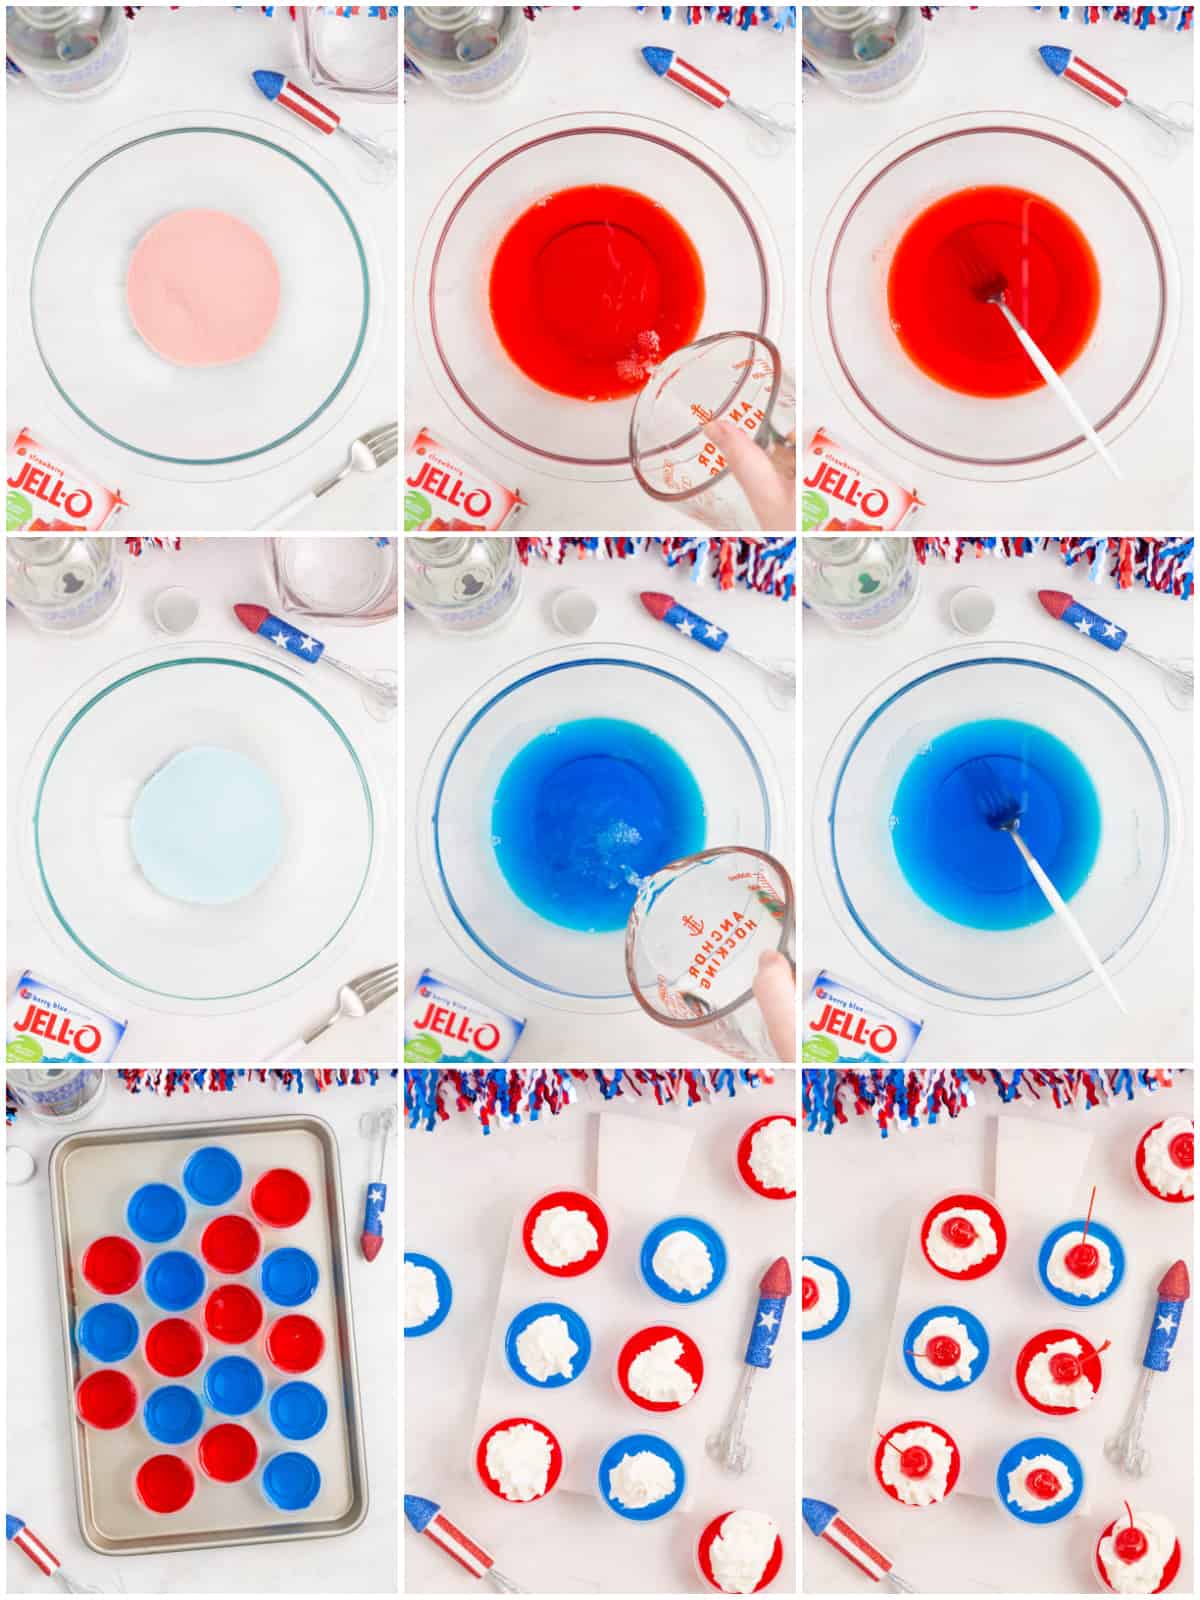 Step by step photos on how to make 4th of July Jello Shots.